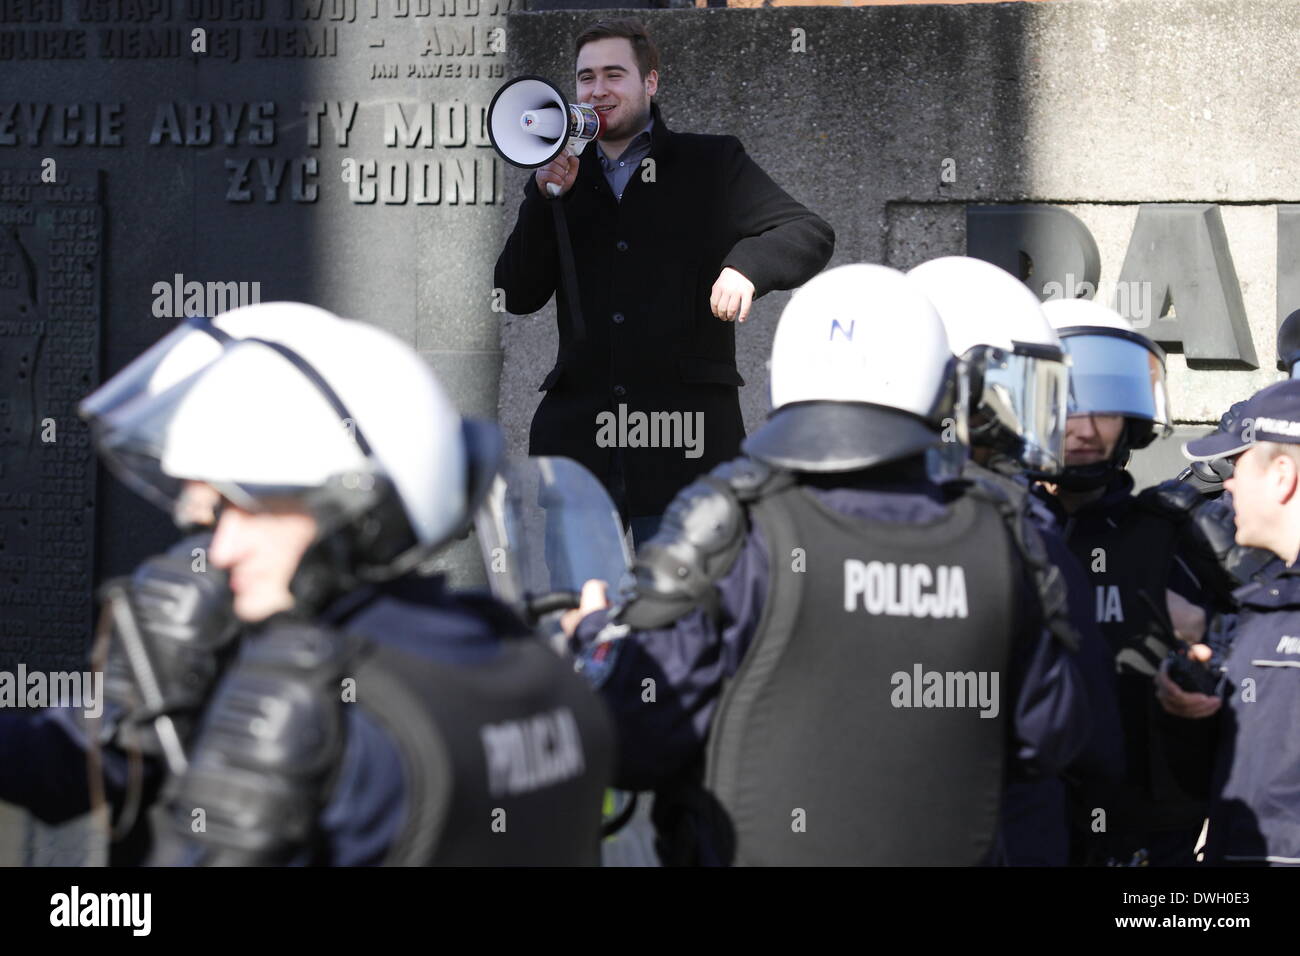 Gdansk, Poland 8th, March 2014 Nacionalists and facist organizations counter demonstration to feminist Manifa 2014 rally. Nacinalists protest against womans, and gay  rights. Police anti-riots forces were used to guard Manifa 2014 rally. Credit:  Michal Fludra/Alamy Live News Stock Photo